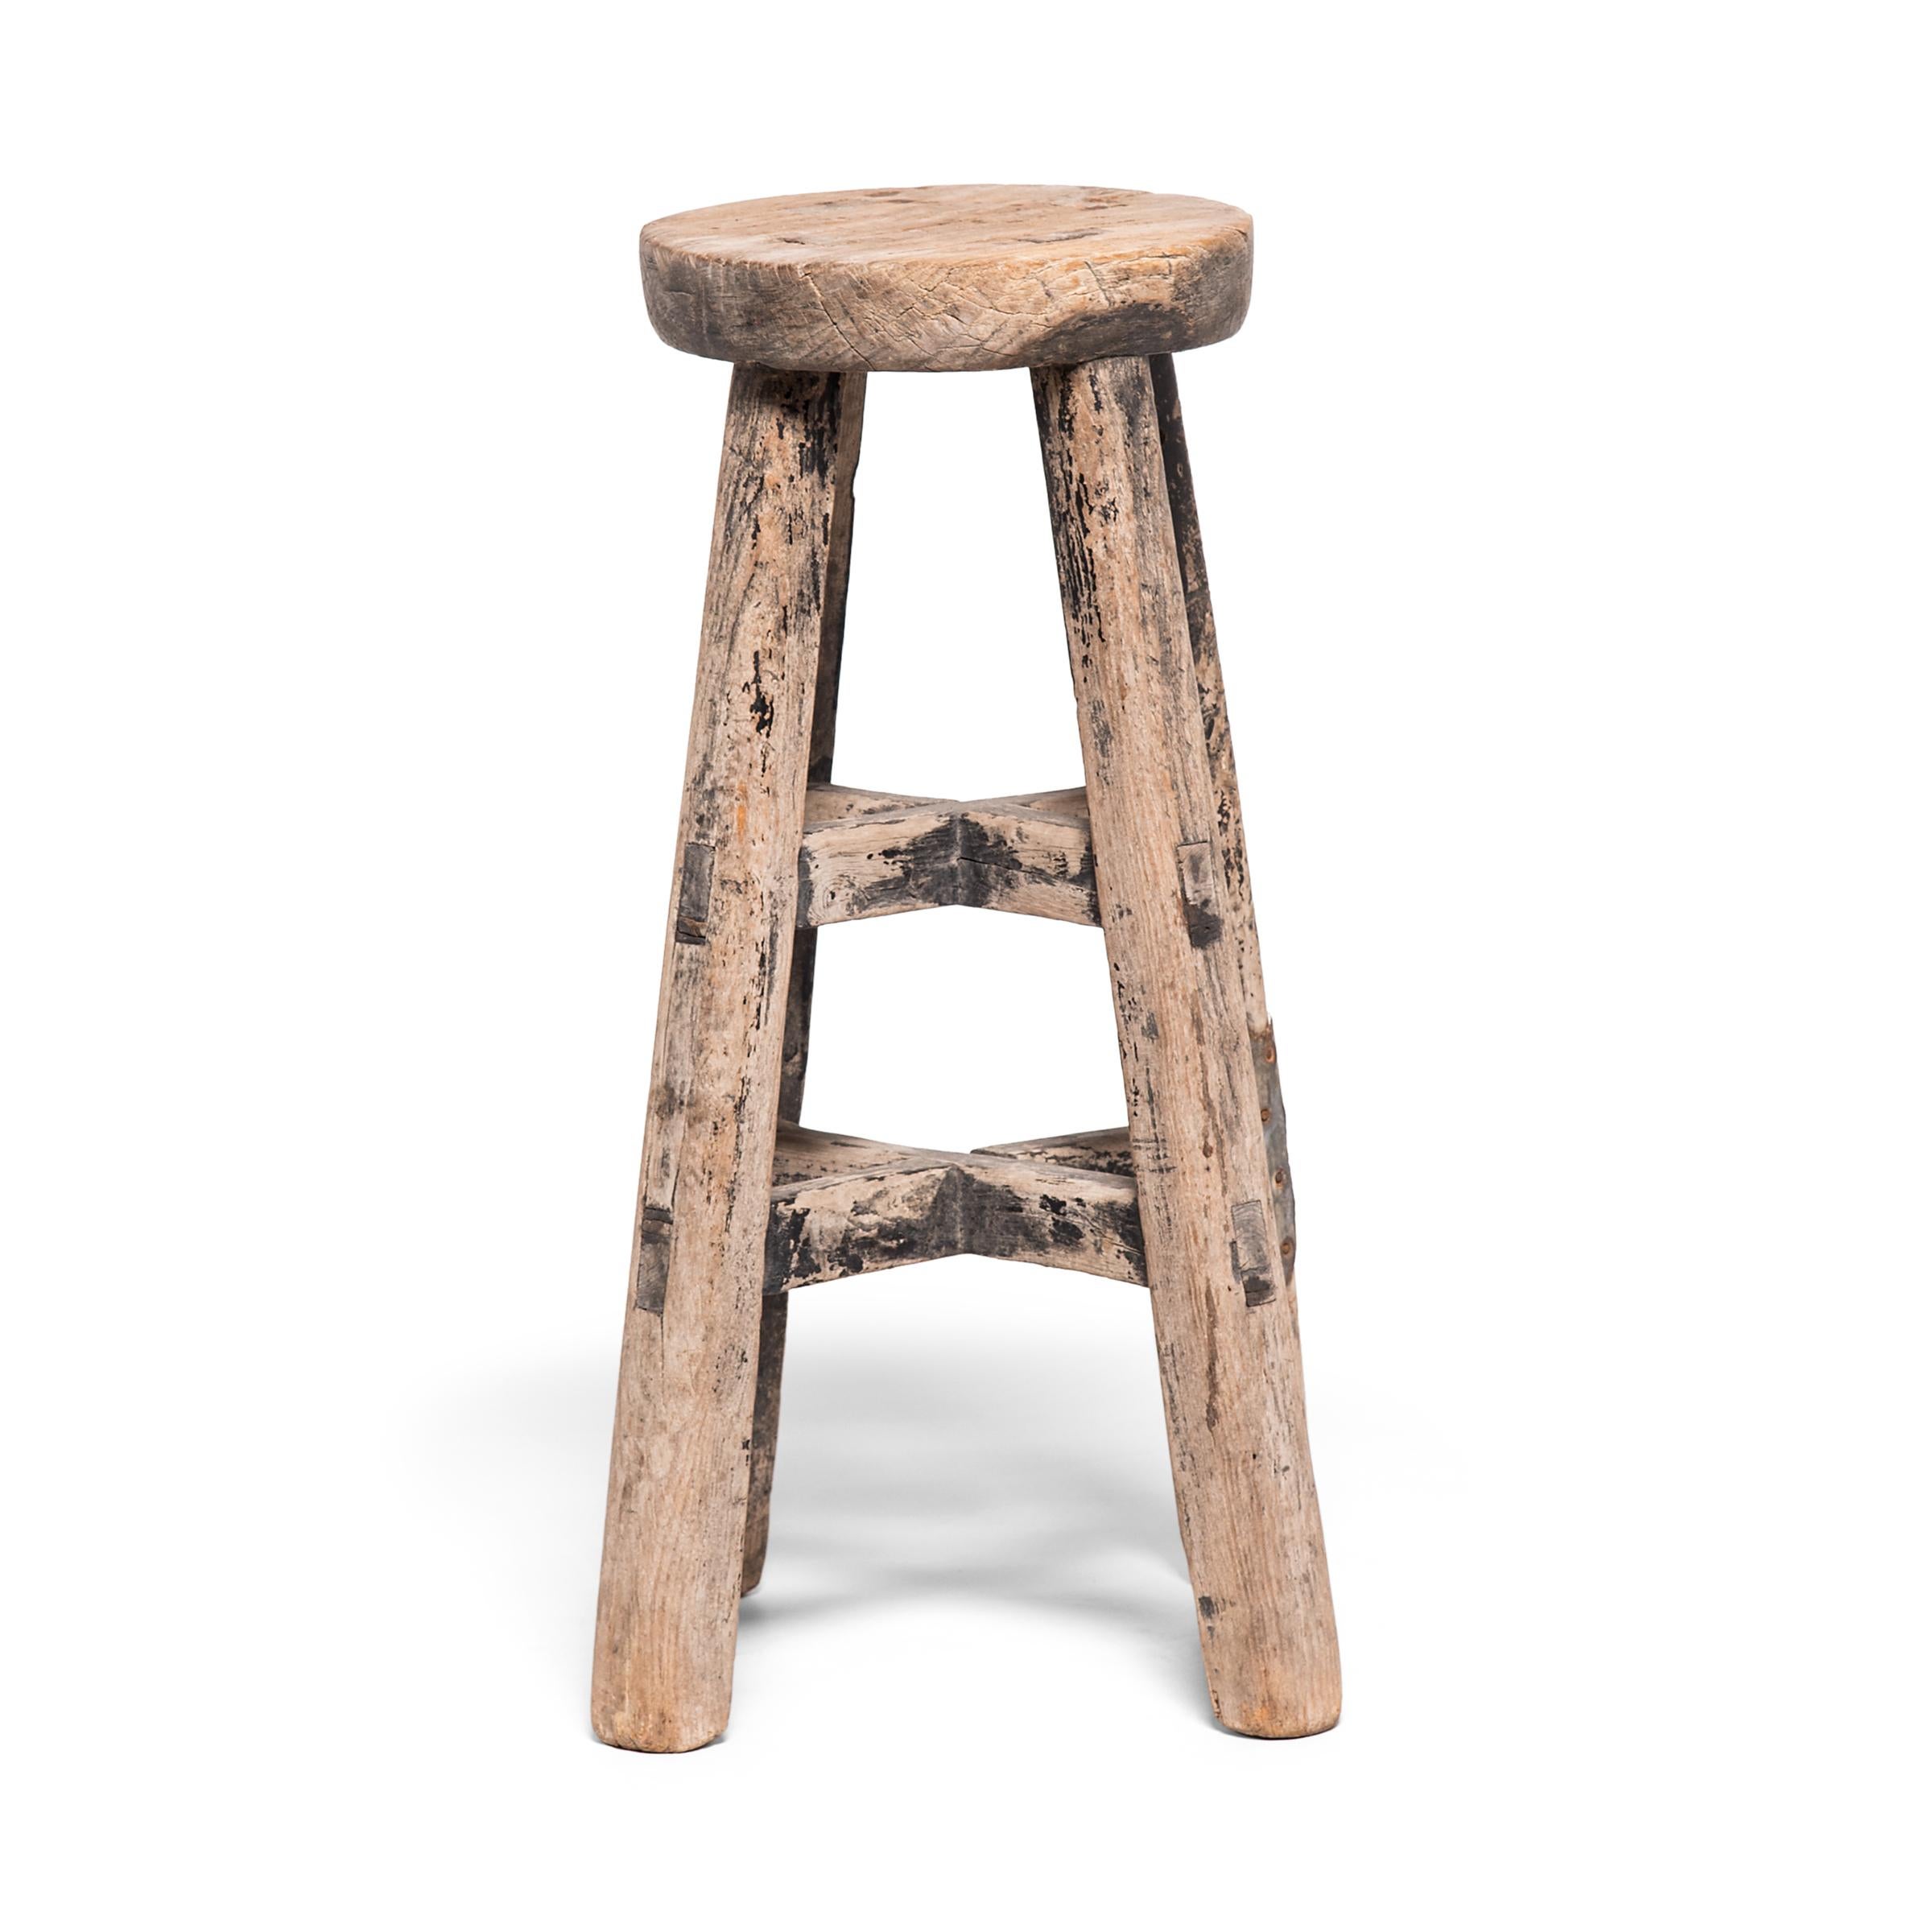 This petite 19th century stool from China's Shanxi province charms with its small scale and complex construction. Crafted with traditional mortise-and-tenon joinery techniques, the stool features four legs and two sets of interlocking stretchers,